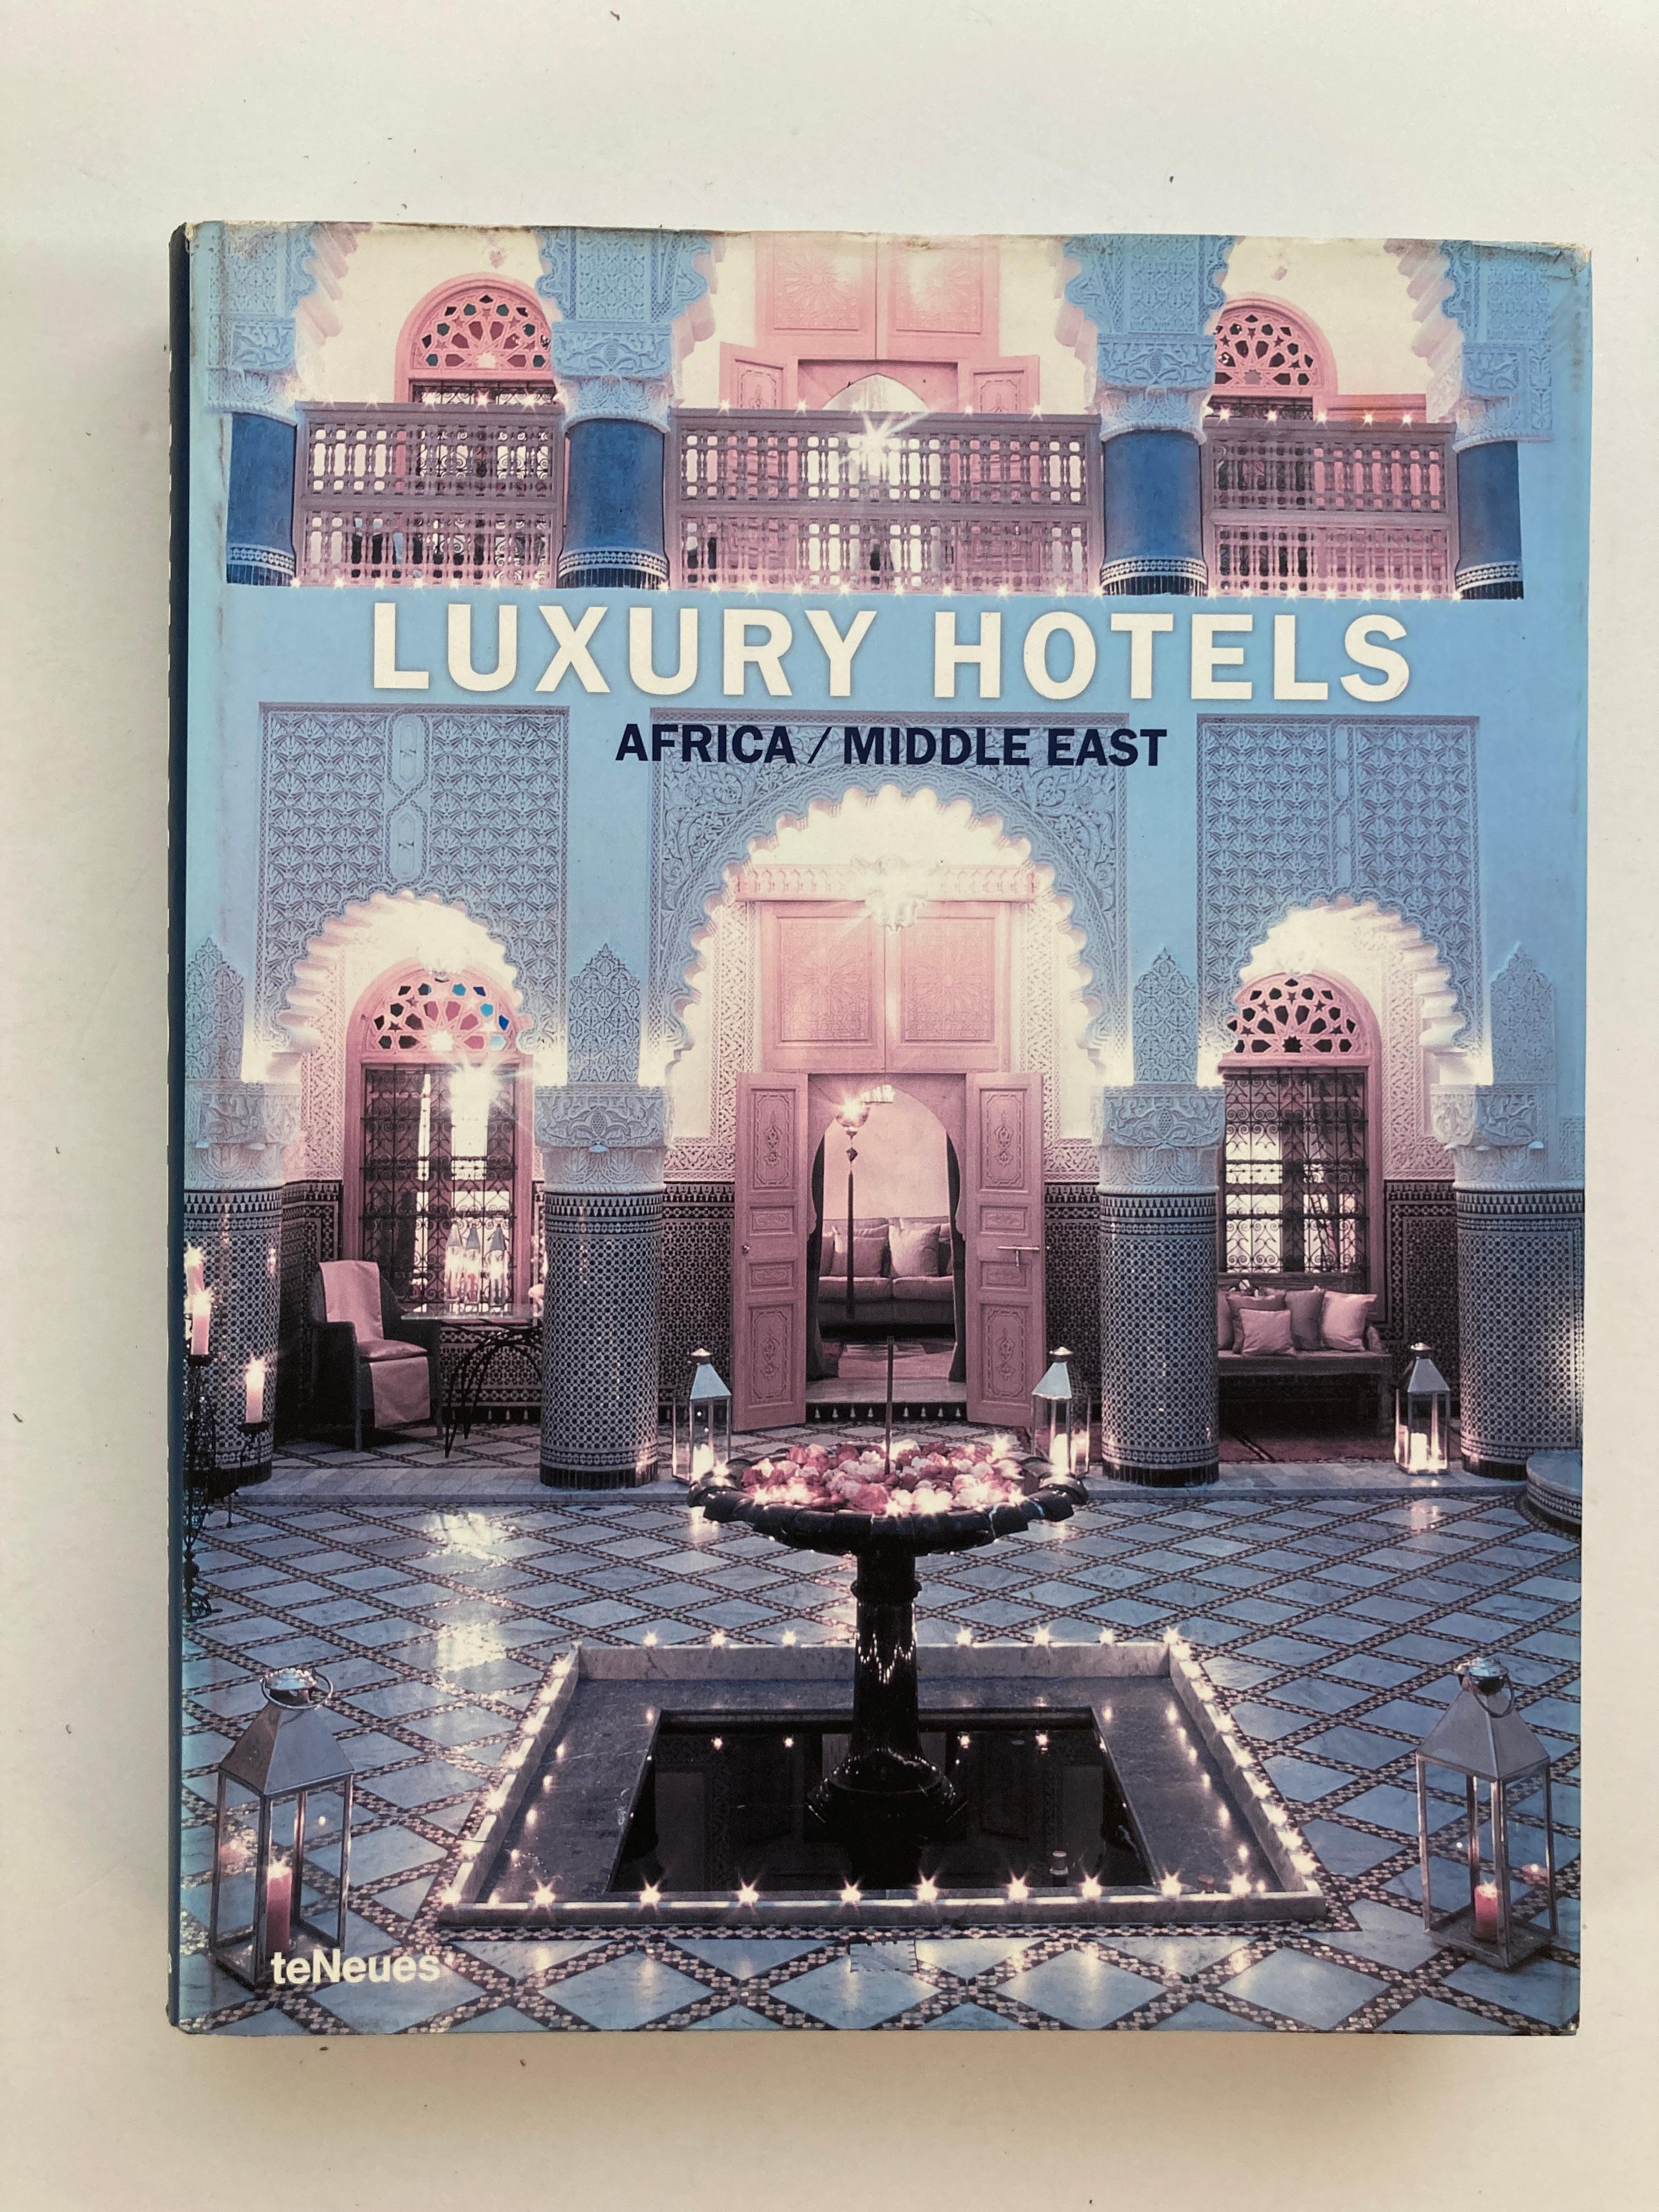 Luxury Hotels Africa Middle East Hardcover - September 15, 2005
by Martin Nicholas Kunz (Author)
This volume of teNeues?s series in luxury hotels around the world takes the reader to hotels in Africa and the Middle East. Let your fantasy take